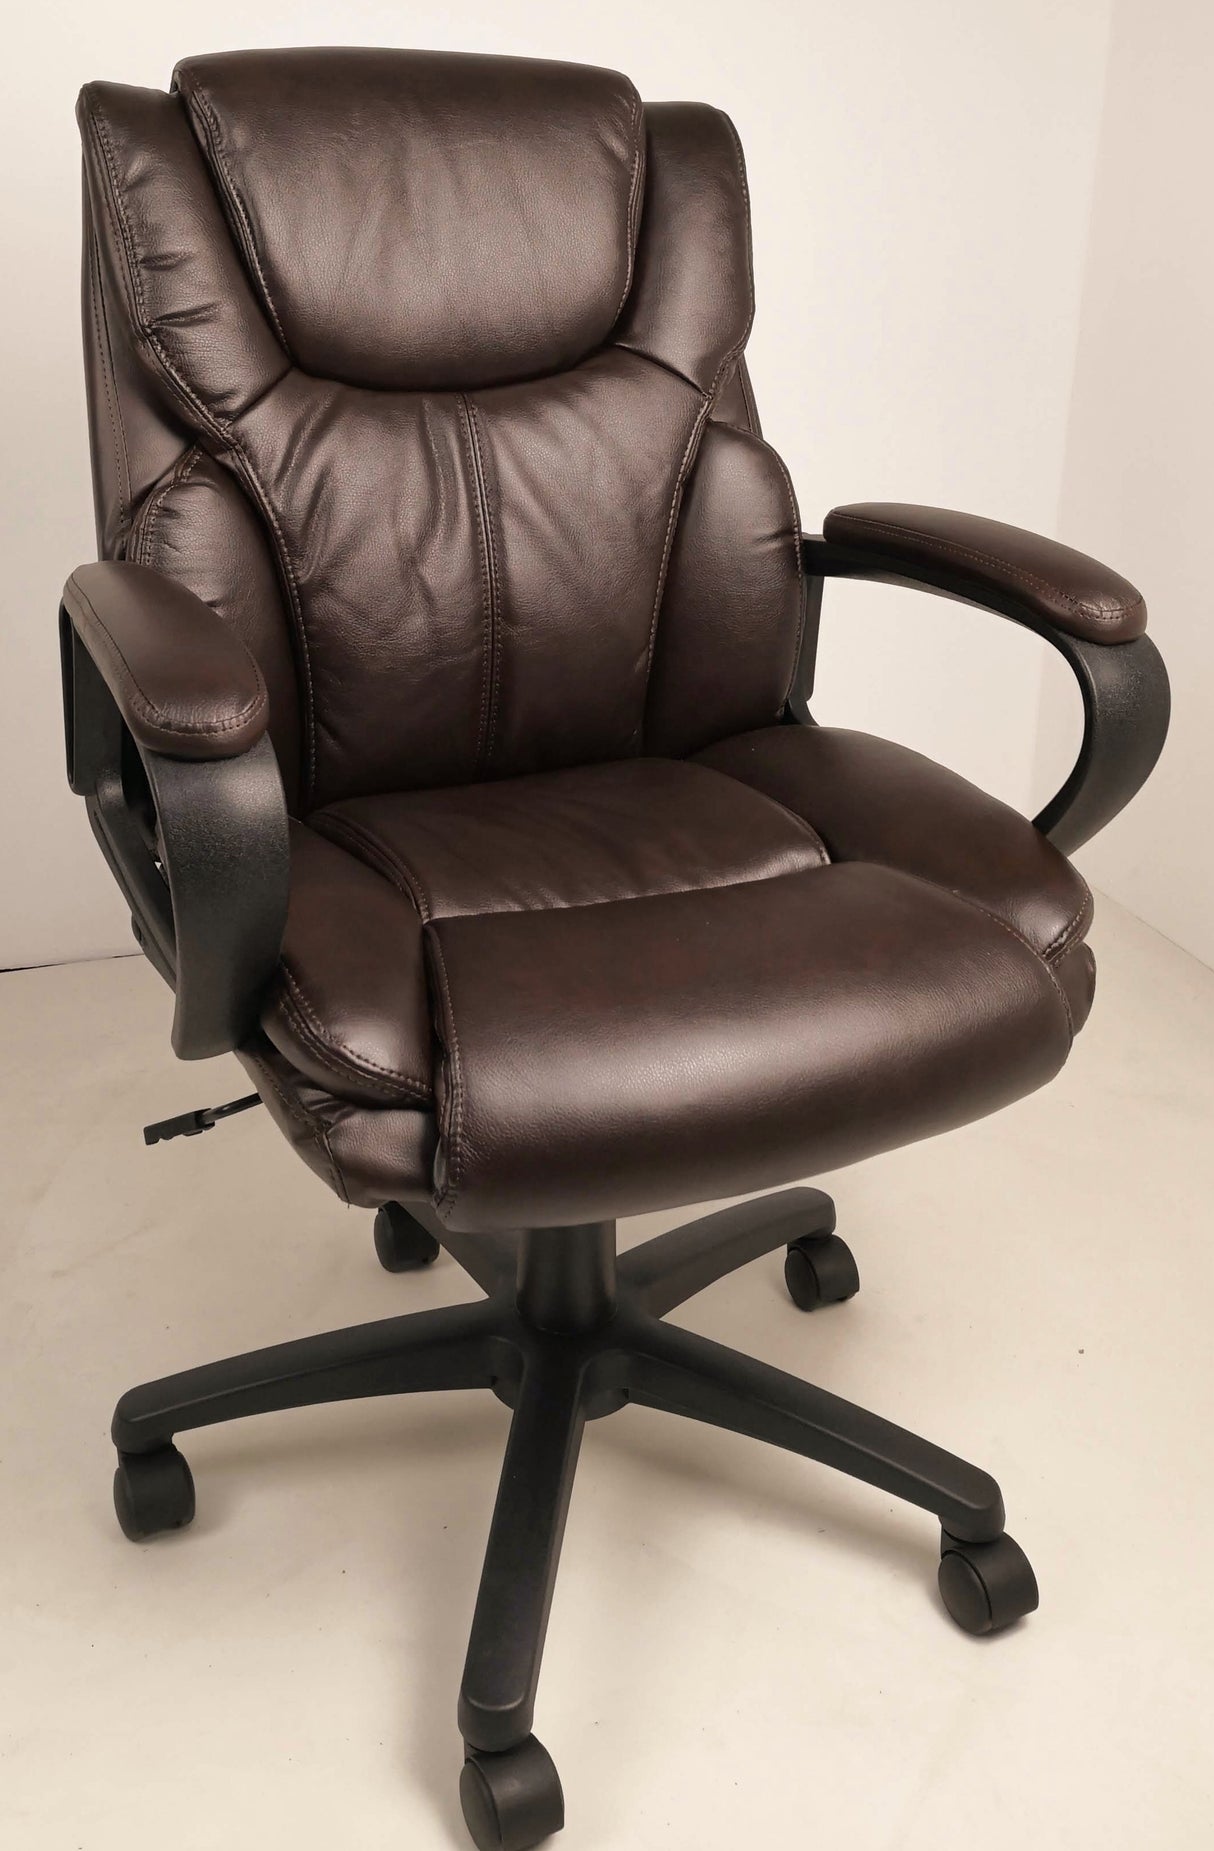 Soft Padded Low Back Executive Office Chair in Brown Leather - 2121C